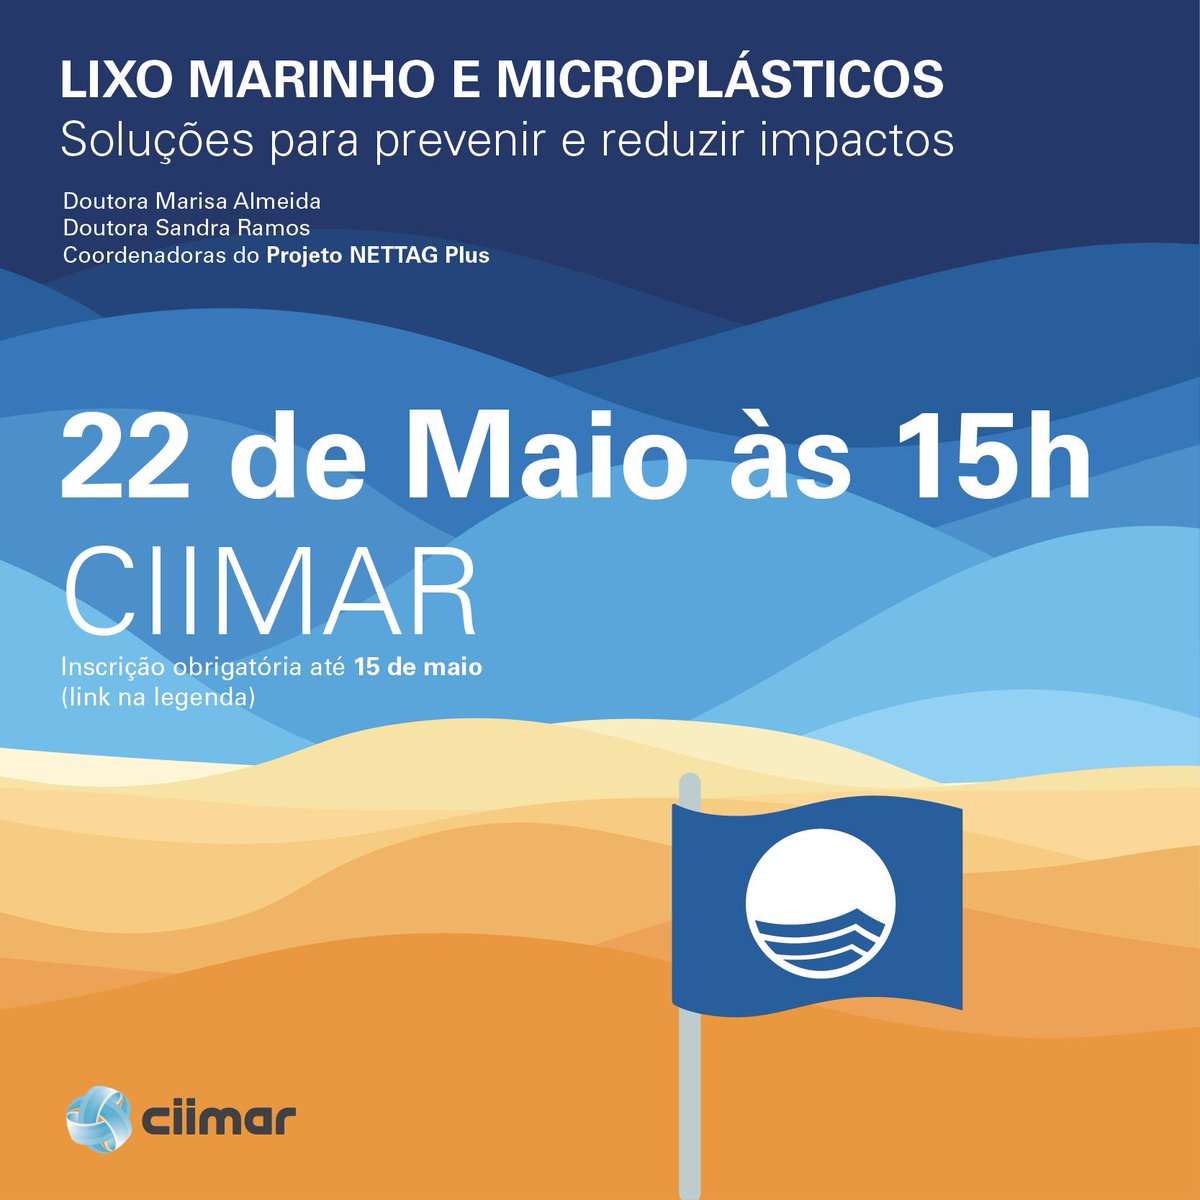 CIIMAR, in partnership with the Pavilhão da Água, will hold a lecture on the origins and impacts of marine litter. 📅 May 22 🕒 15h 📍 CIIMAR 🎓 Target Audience: Students from the 3rd cycle onwards 🔗 Register here: ciimar.up.pt/events/lecture… #CIIMARevents